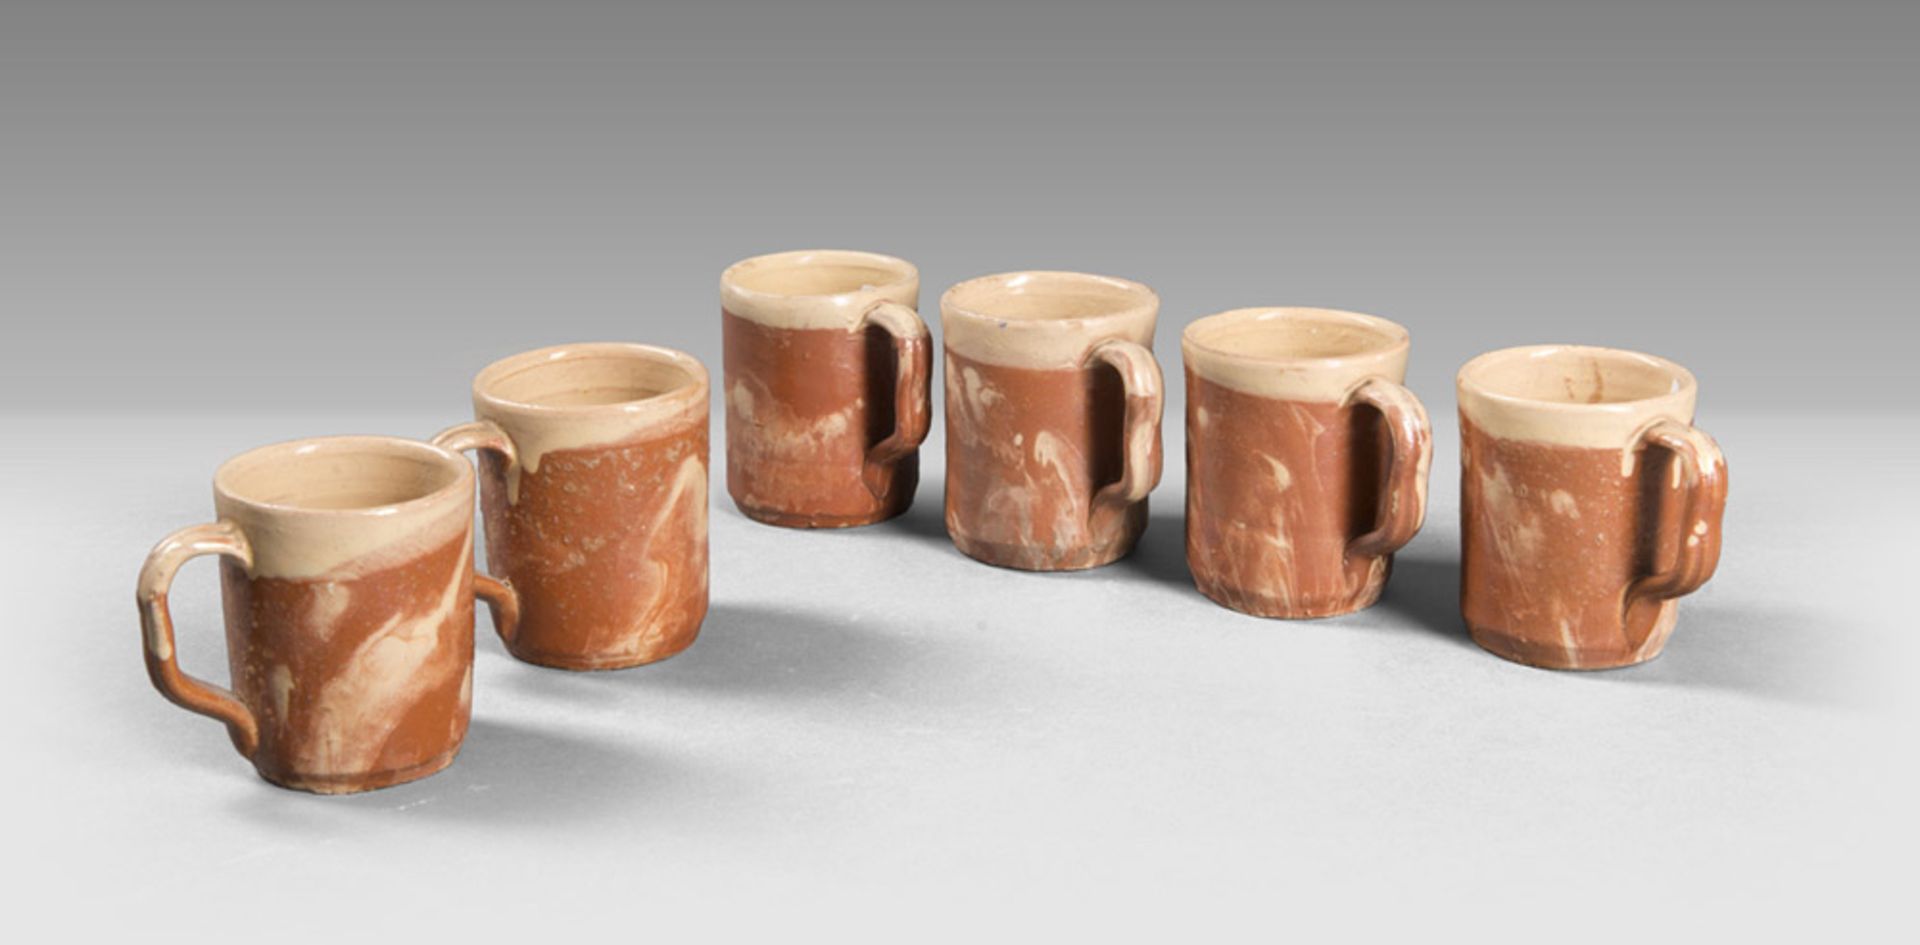 SIX EARTHENWARE GLASSES, SOUTHERN ITALY LATE 19TH CENTURY